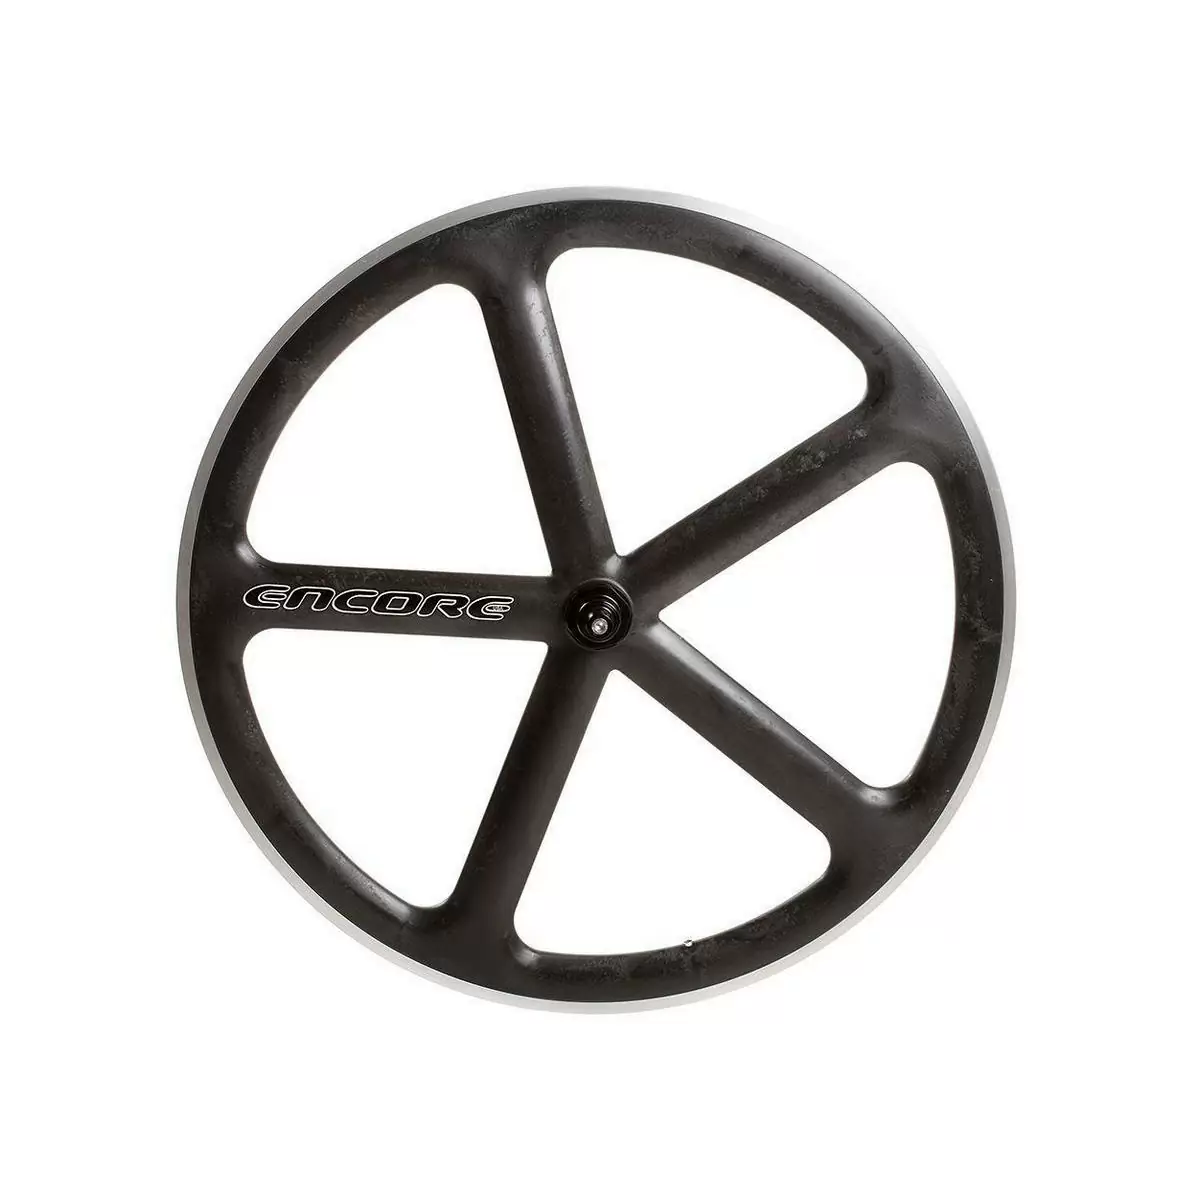 rear wheel 700c track 5 spokes carbon weave natural msw - image